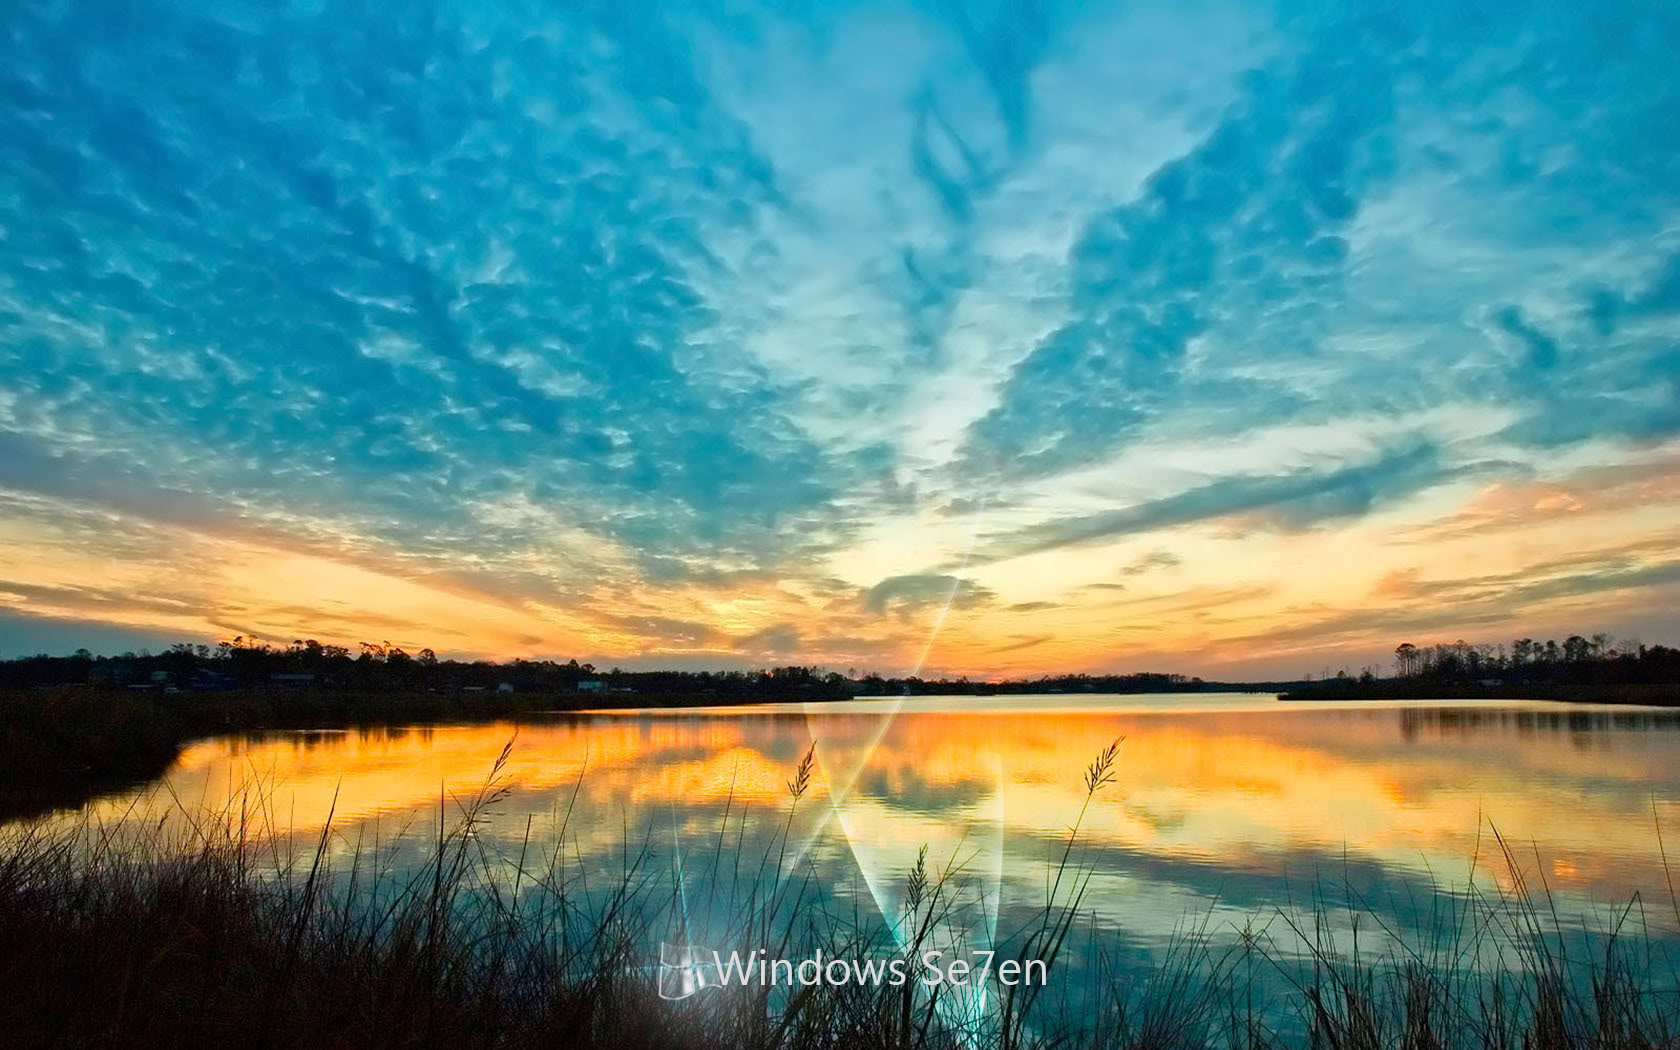 WINDOWS 7 COOL Wallpapers Free Download Collections 33 High Quality